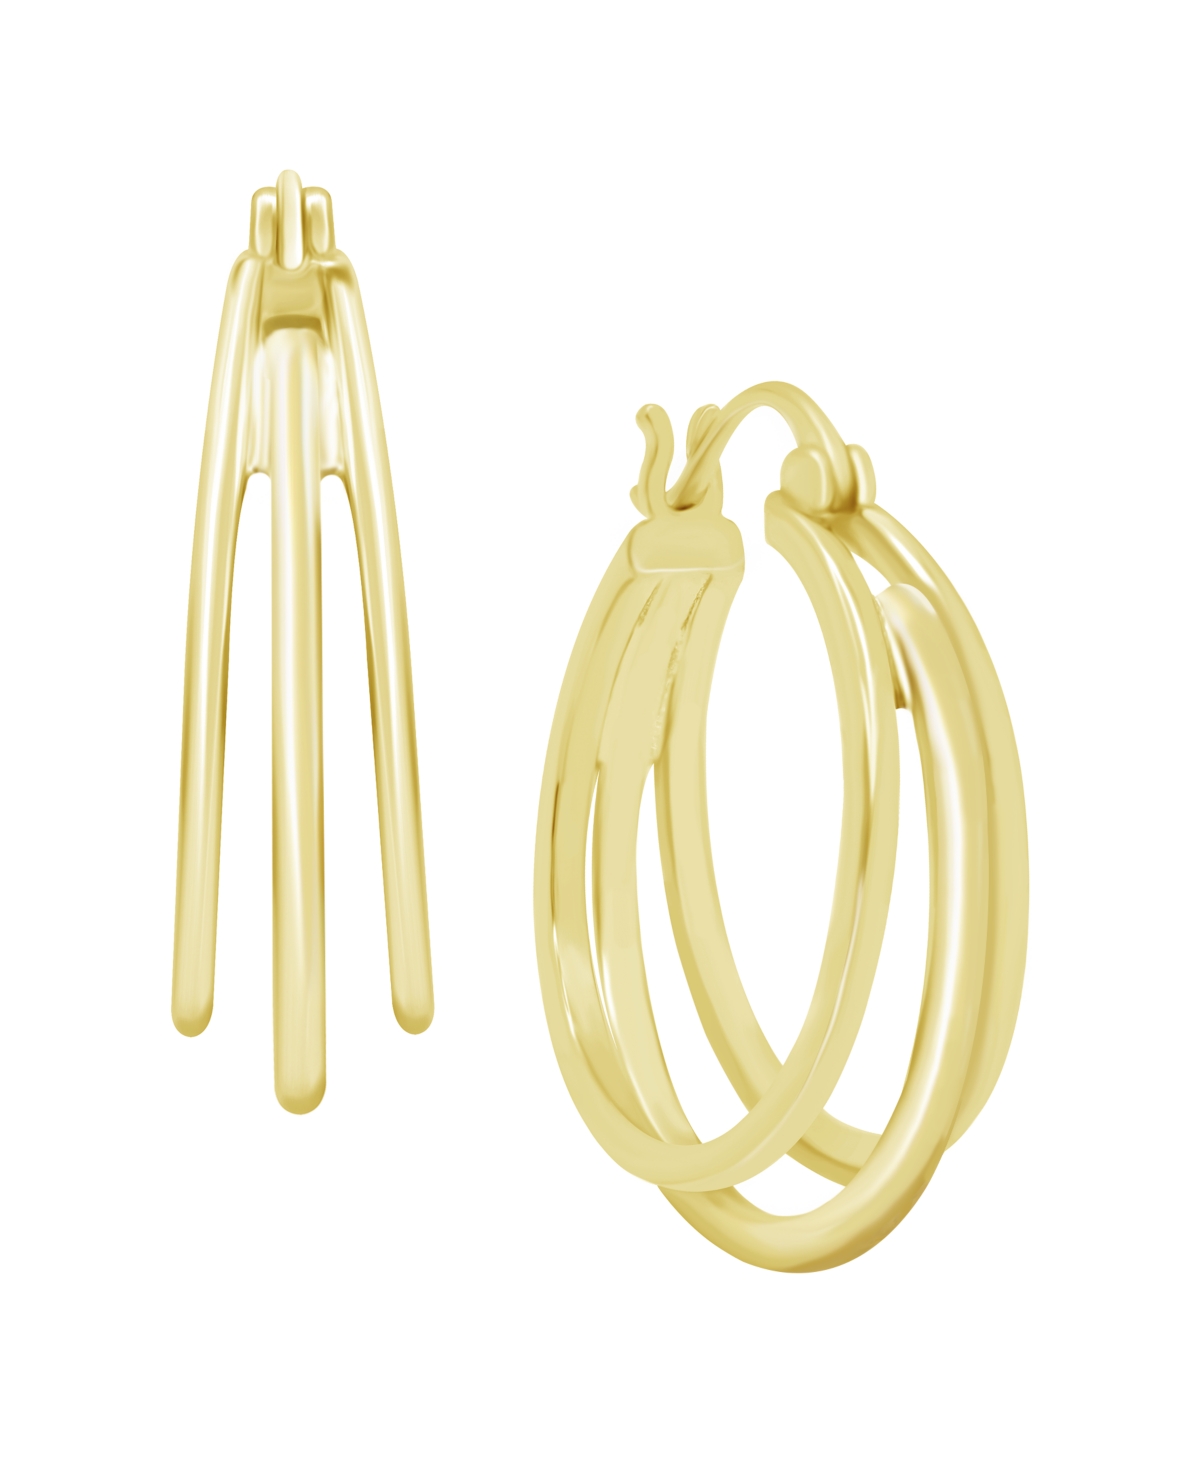 Triple Point Oval Click Top Hoop Earring in Silver Plate or Gold Plate - Gold